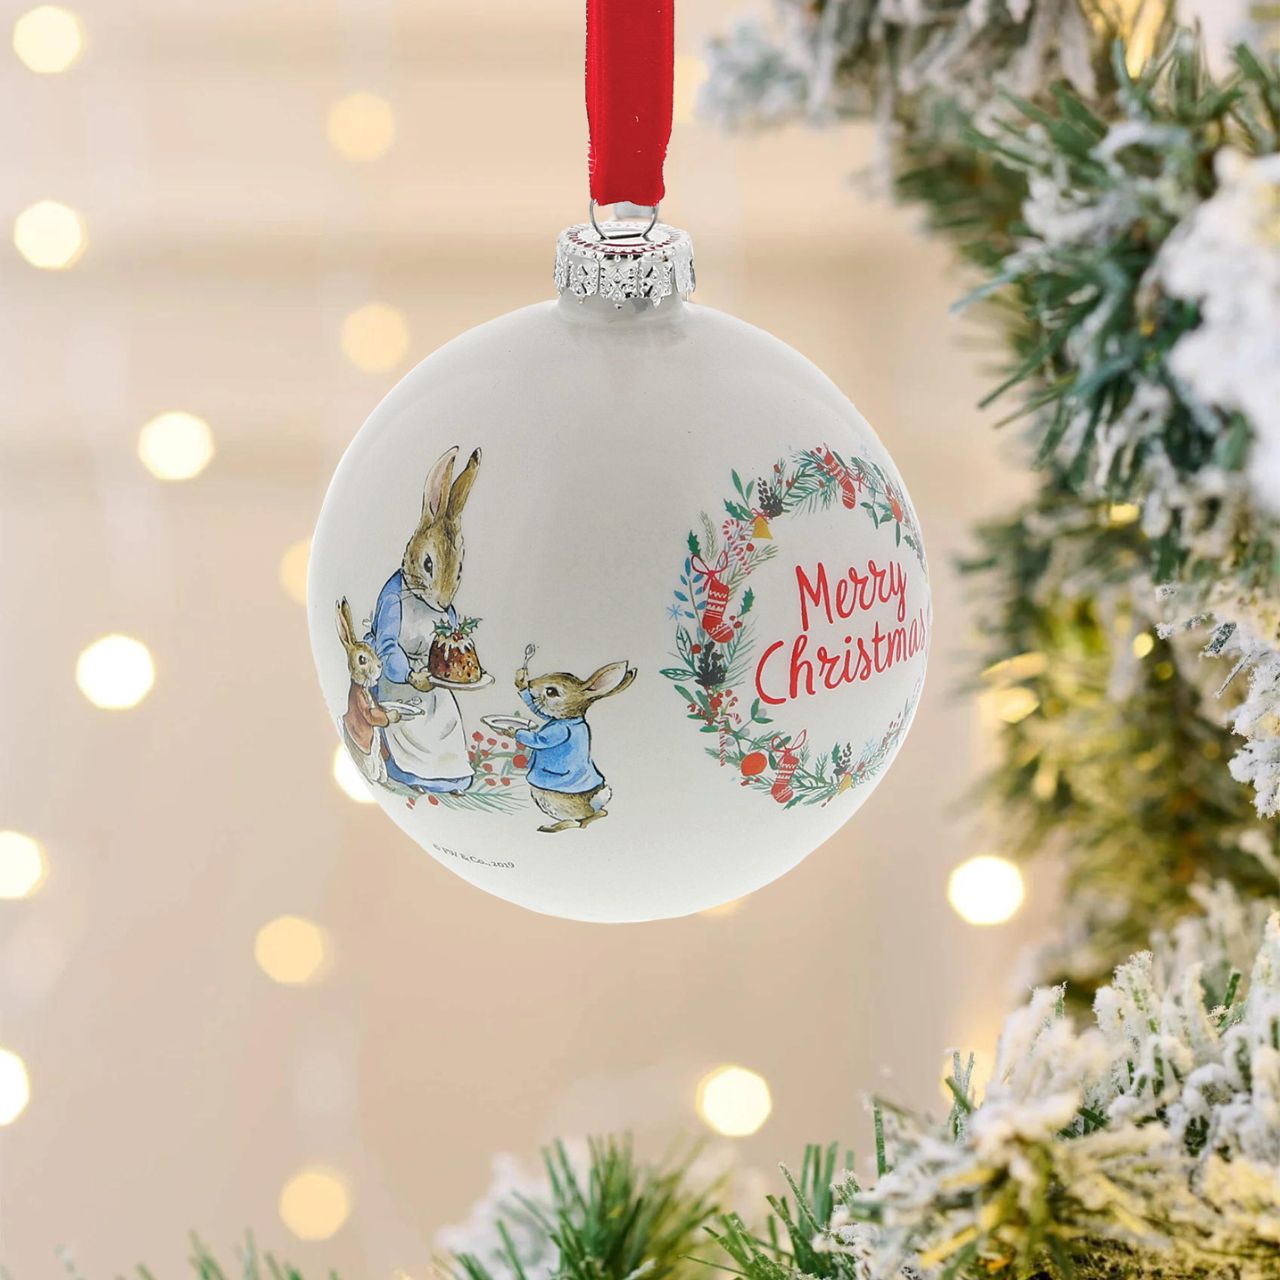 Beatrix Potter Peter Rabbit Christmas Bauble  A beautiful glass Peter Rabbit Bauble that makes a treasured keepsake all year round. The artwork for each product is taken from the original illustrations from the Beatrix Potter stories, helping bring each character to life.